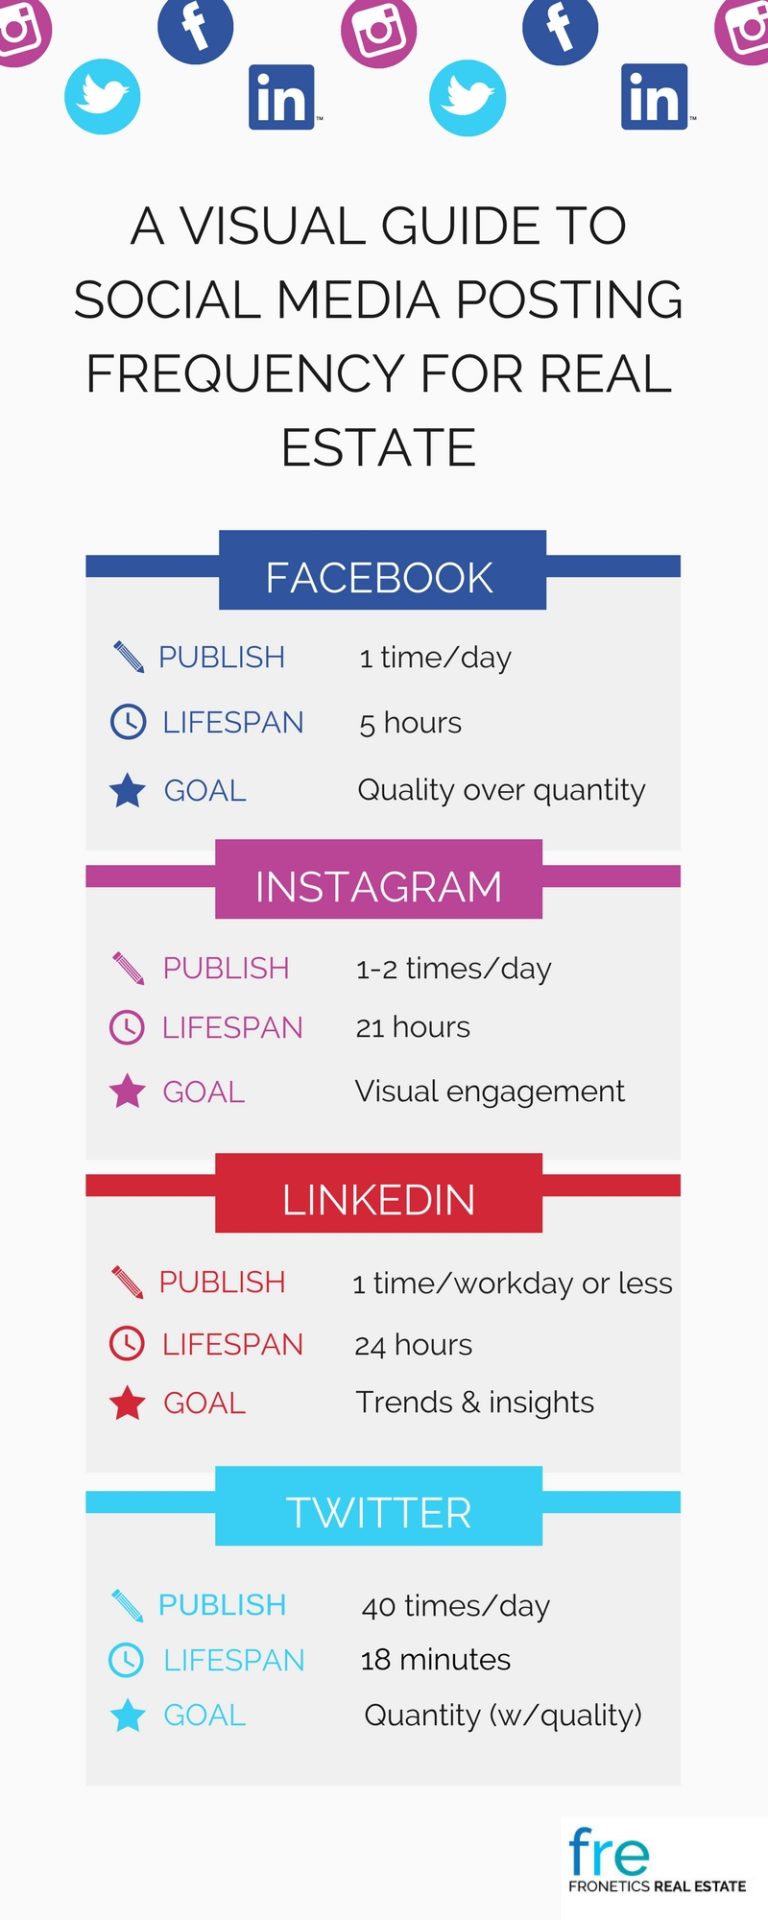 A Visual Guide to Social Media Posting Frequency for Real Estate